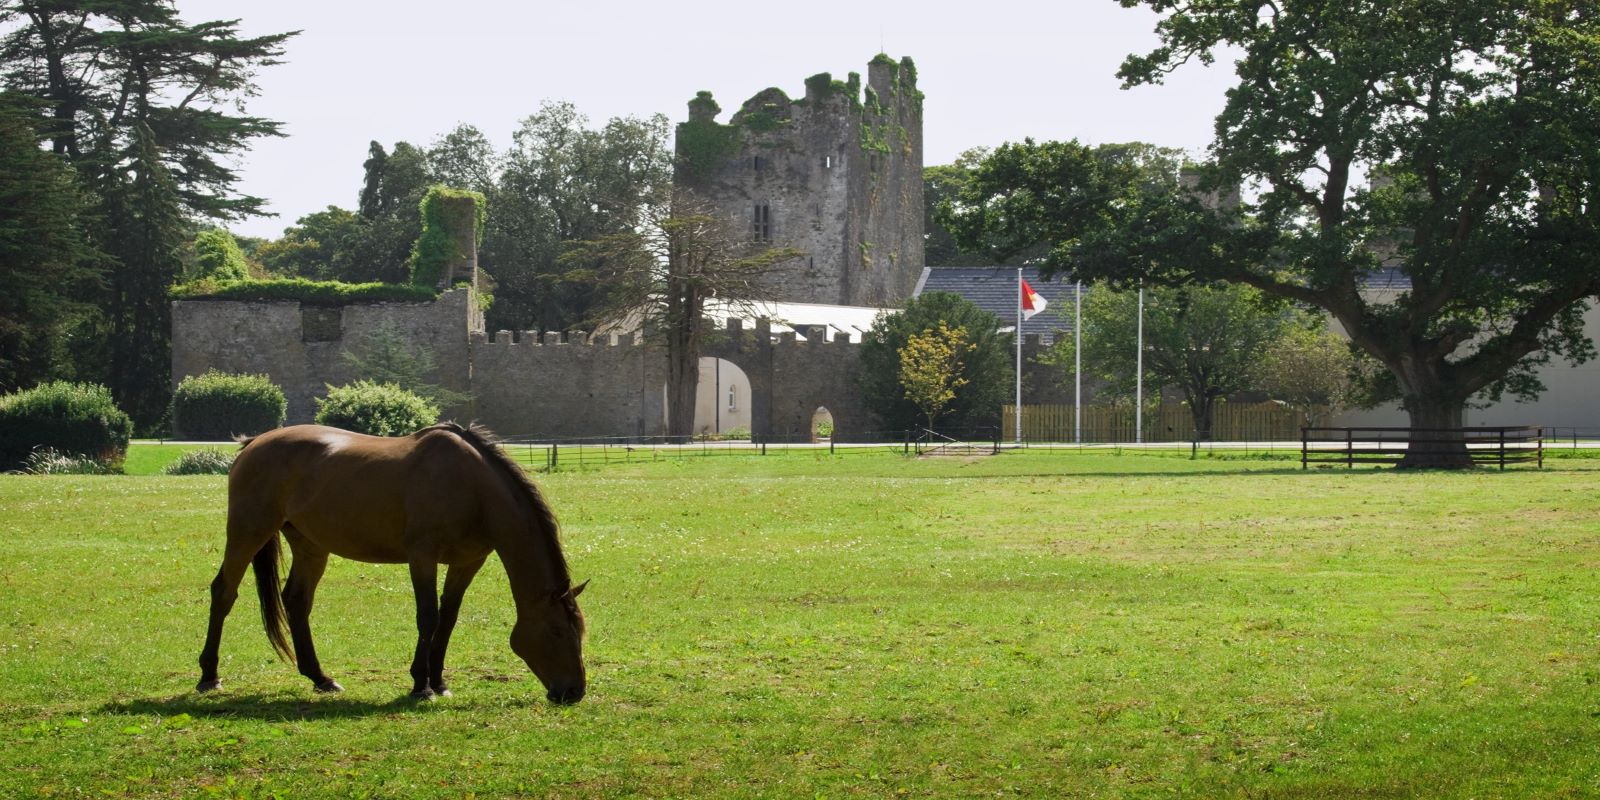 Wander the lush Irish countryside and through the quaint village of Castlemartyr.